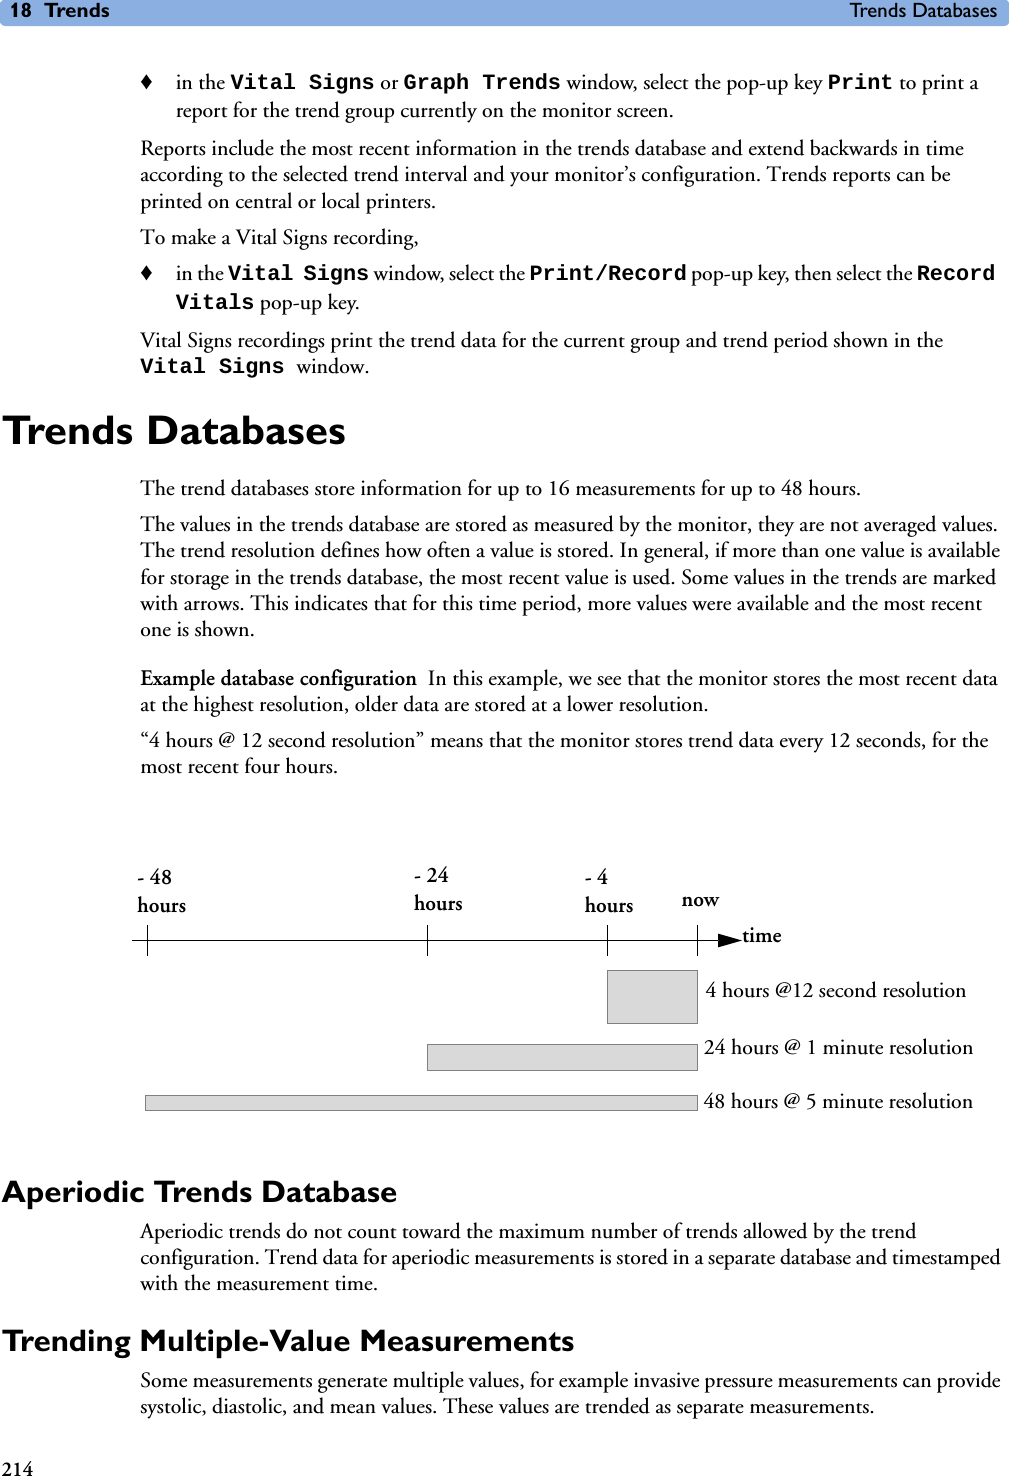 18 Trends Trends Databases214♦in the Vital Signs or Graph Trends window, select the pop-up key Print to print a report for the trend group currently on the monitor screen. Reports include the most recent information in the trends database and extend backwards in time according to the selected trend interval and your monitor’s configuration. Trends reports can be printed on central or local printers. To make a Vital Signs recording,♦in the Vital Signs window, select the Print/Record pop-up key, then select the Record Vitals pop-up key.Vital Signs recordings print the trend data for the current group and trend period shown in the Vital Signs window. Trends DatabasesThe trend databases store information for up to 16 measurements for up to 48 hours.The values in the trends database are stored as measured by the monitor, they are not averaged values. The trend resolution defines how often a value is stored. In general, if more than one value is available for storage in the trends database, the most recent value is used. Some values in the trends are marked with arrows. This indicates that for this time period, more values were available and the most recent one is shown.Example database configuration In this example, we see that the monitor stores the most recent data at the highest resolution, older data are stored at a lower resolution. “4 hours @ 12 second resolution” means that the monitor stores trend data every 12 seconds, for the most recent four hours. Aperiodic Trends DatabaseAperiodic trends do not count toward the maximum number of trends allowed by the trend configuration. Trend data for aperiodic measurements is stored in a separate database and timestamped with the measurement time. Trending Multiple-Value MeasurementsSome measurements generate multiple values, for example invasive pressure measurements can provide systolic, diastolic, and mean values. These values are trended as separate measurements.- 48 hours- 24 hours- 4 hours nowtime4 hours @12 second resolution24 hours @ 1 minute resolution48 hours @ 5 minute resolution